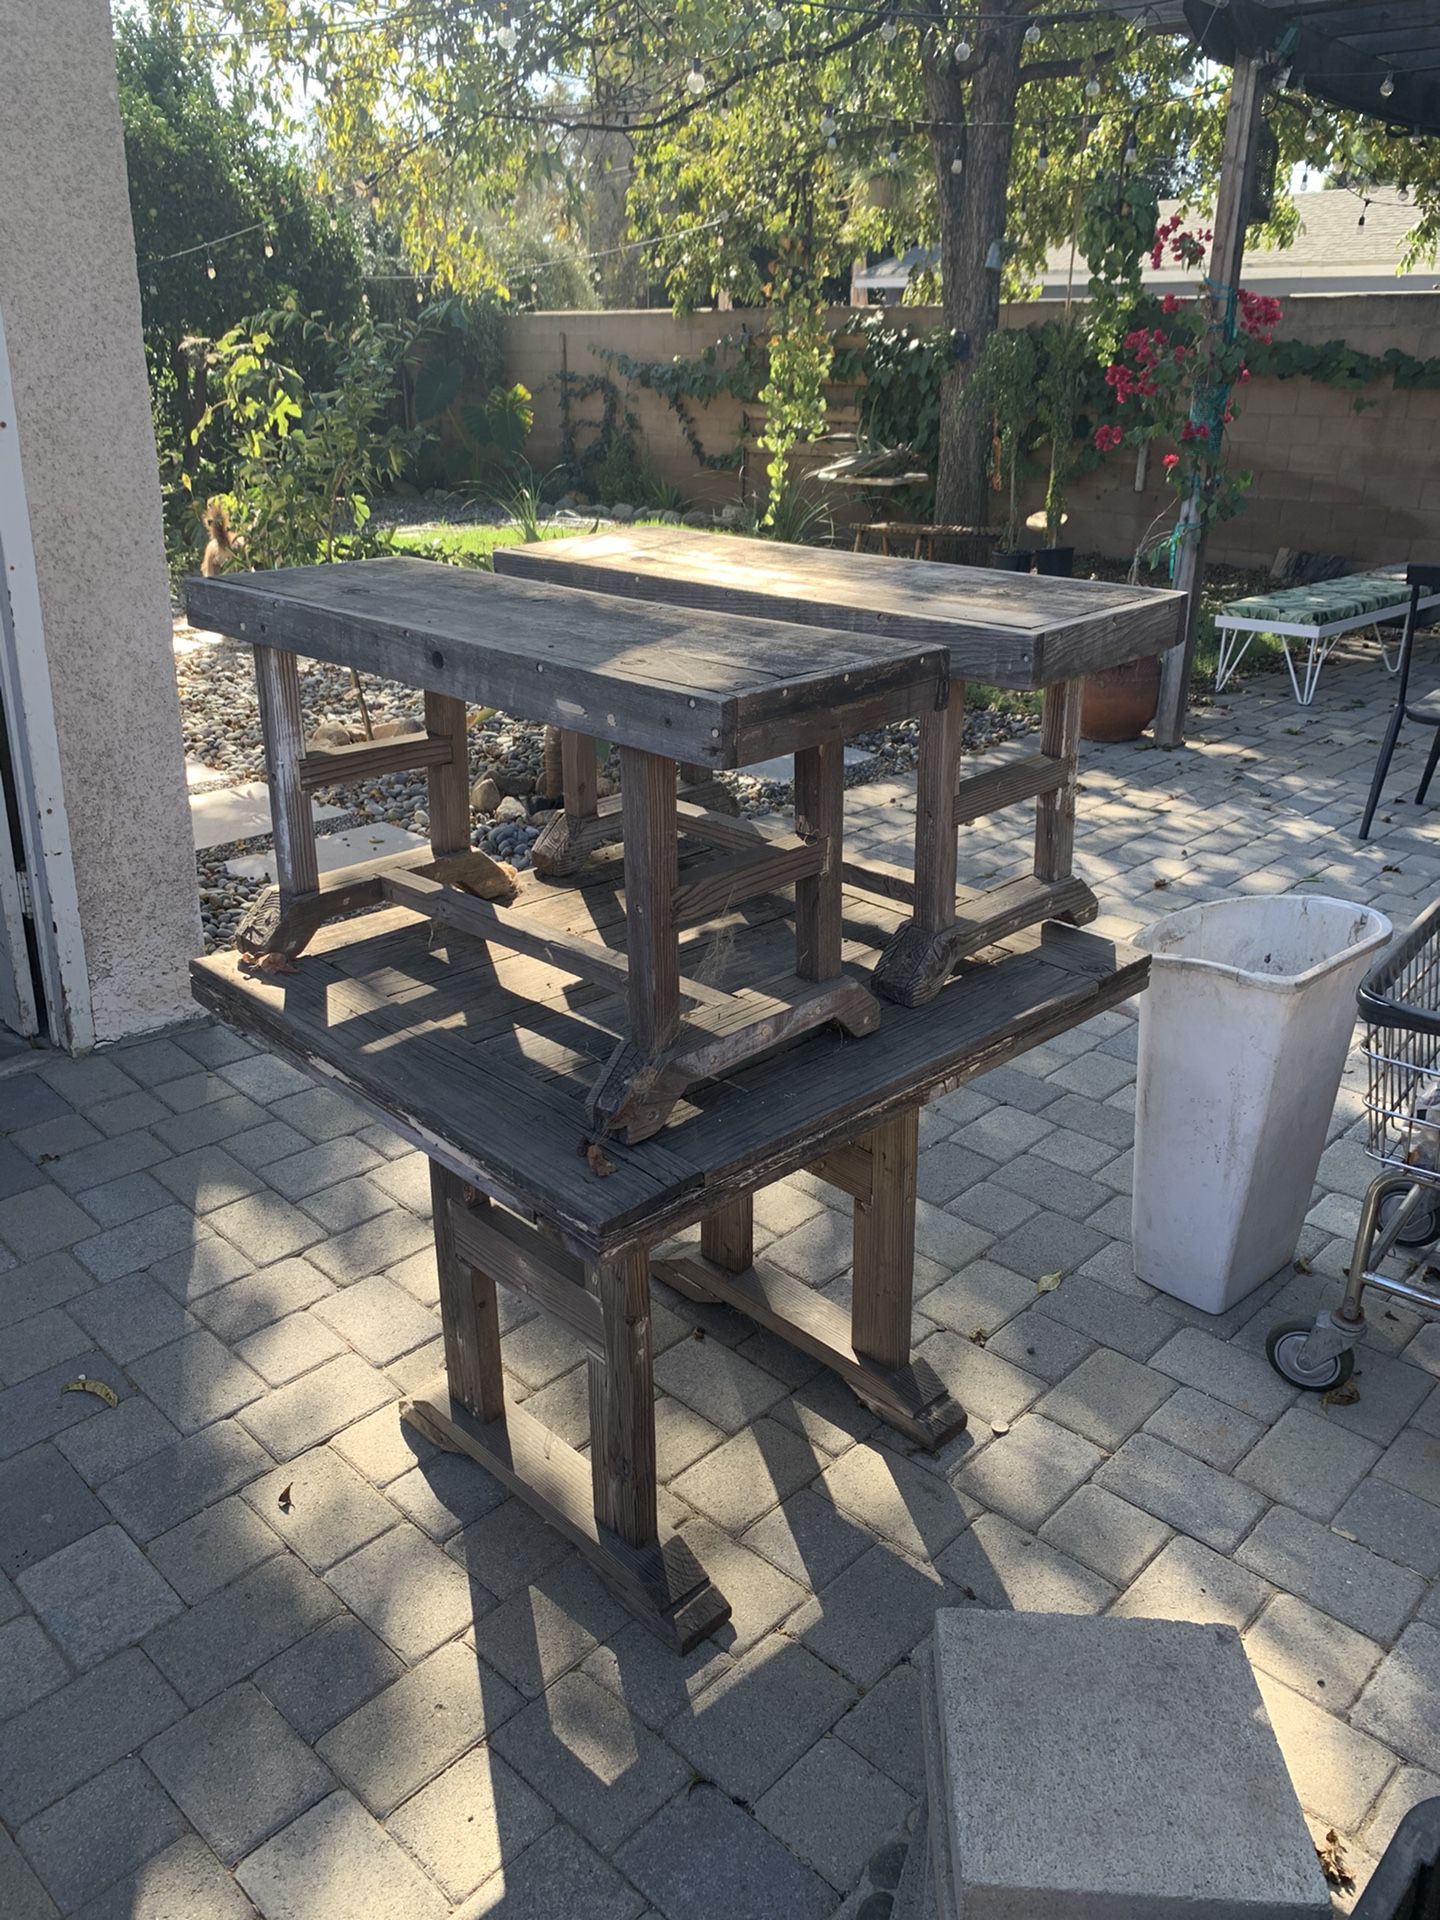 Free wood table, benches, garden pots,